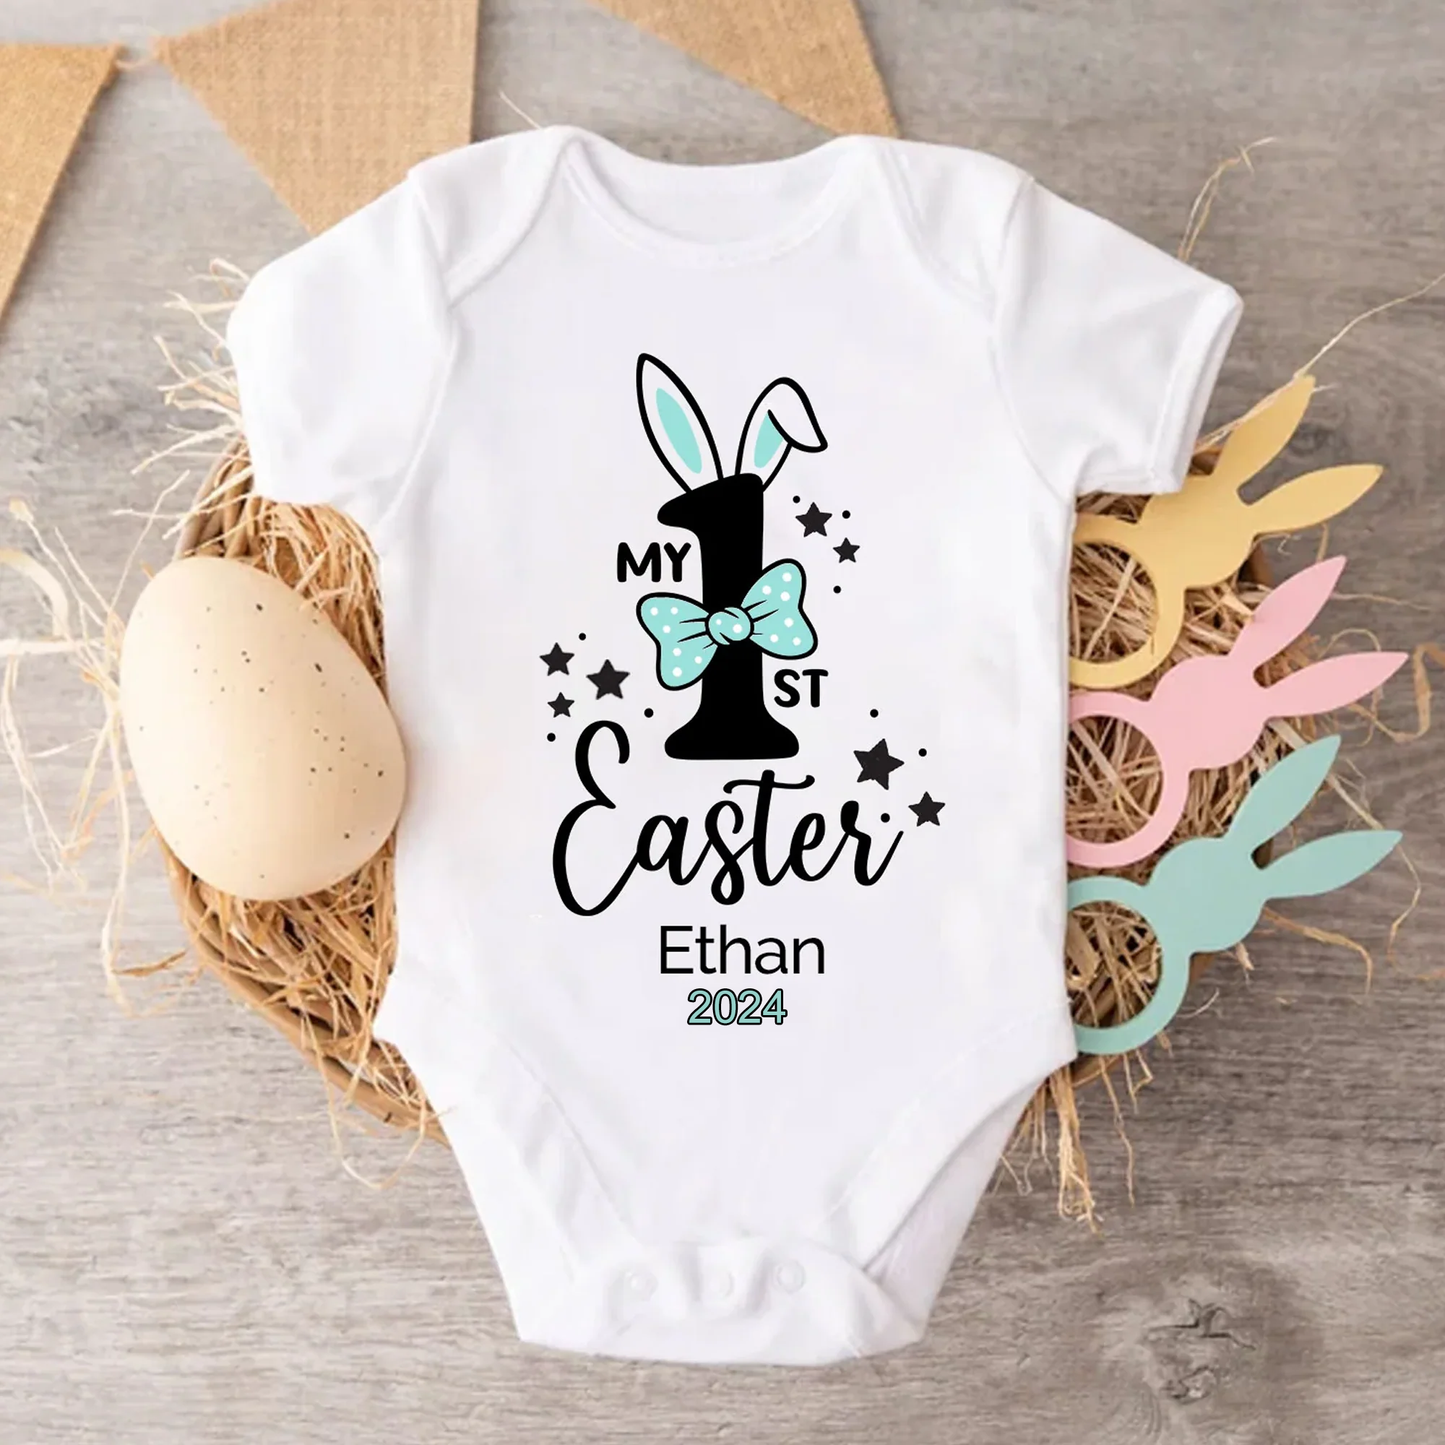 My 1st Easter - Personalised Baby Vest